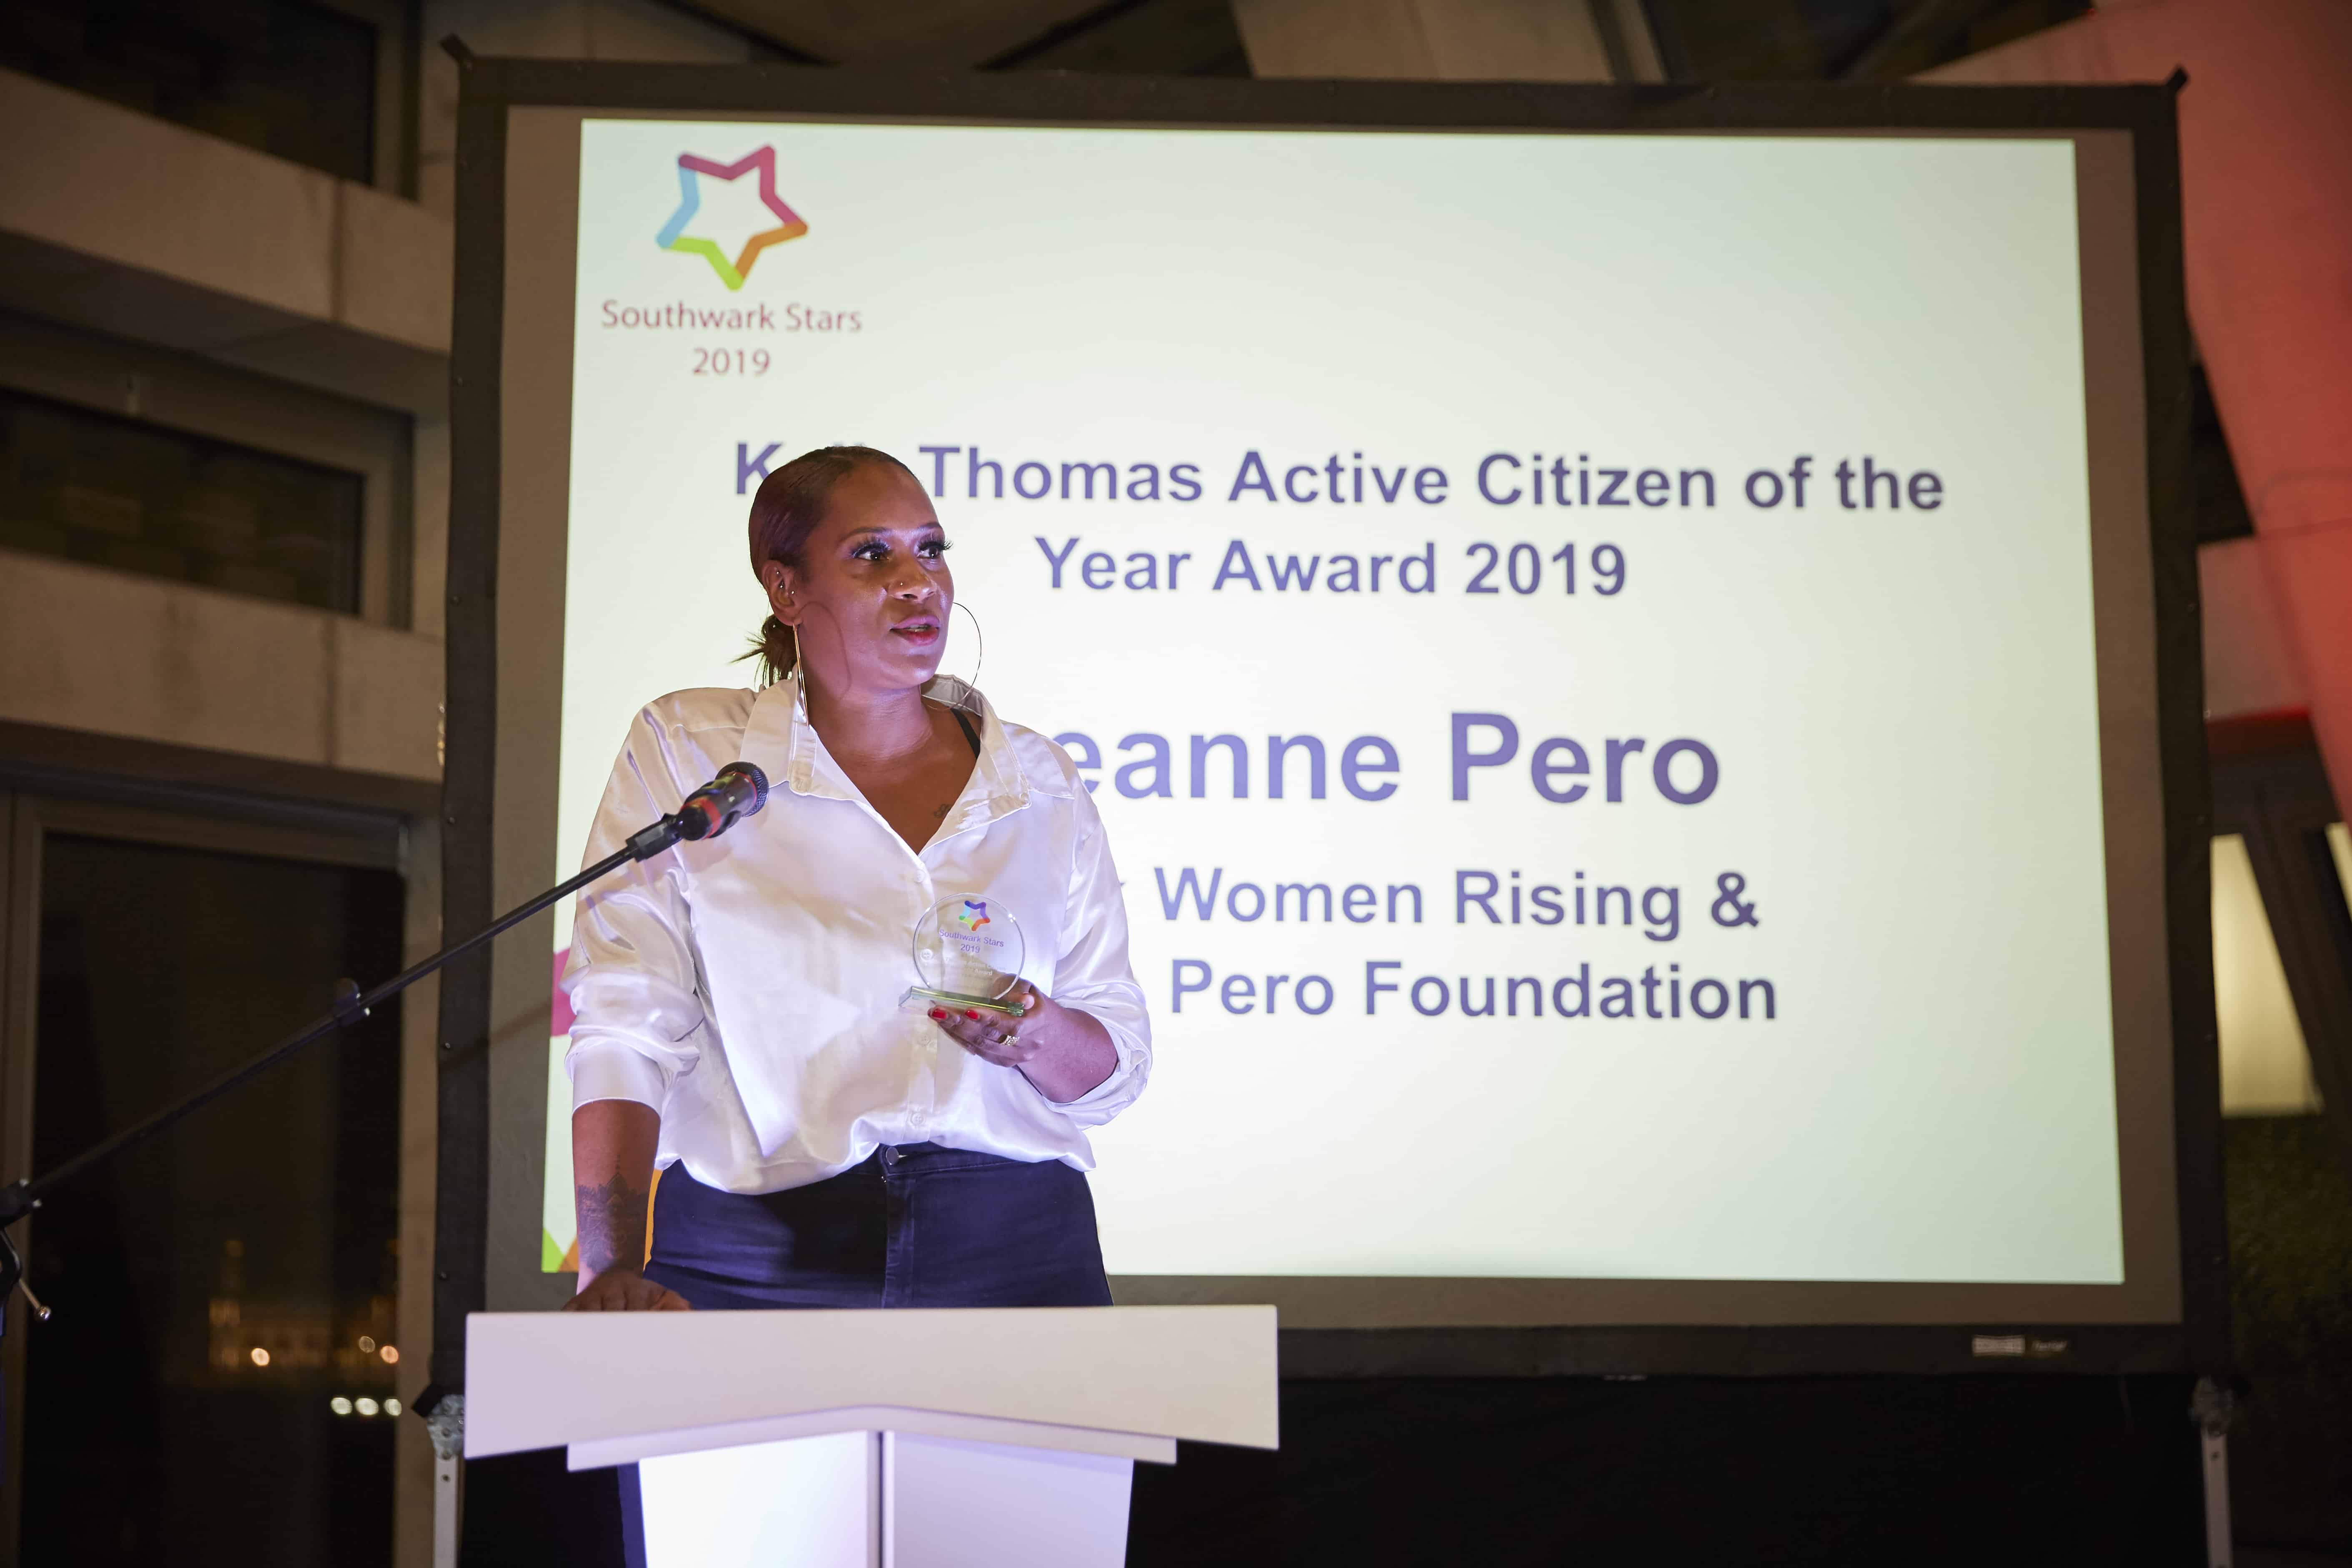 Thomas Keib Active Citizen of the Year Award winner Leanne Pero